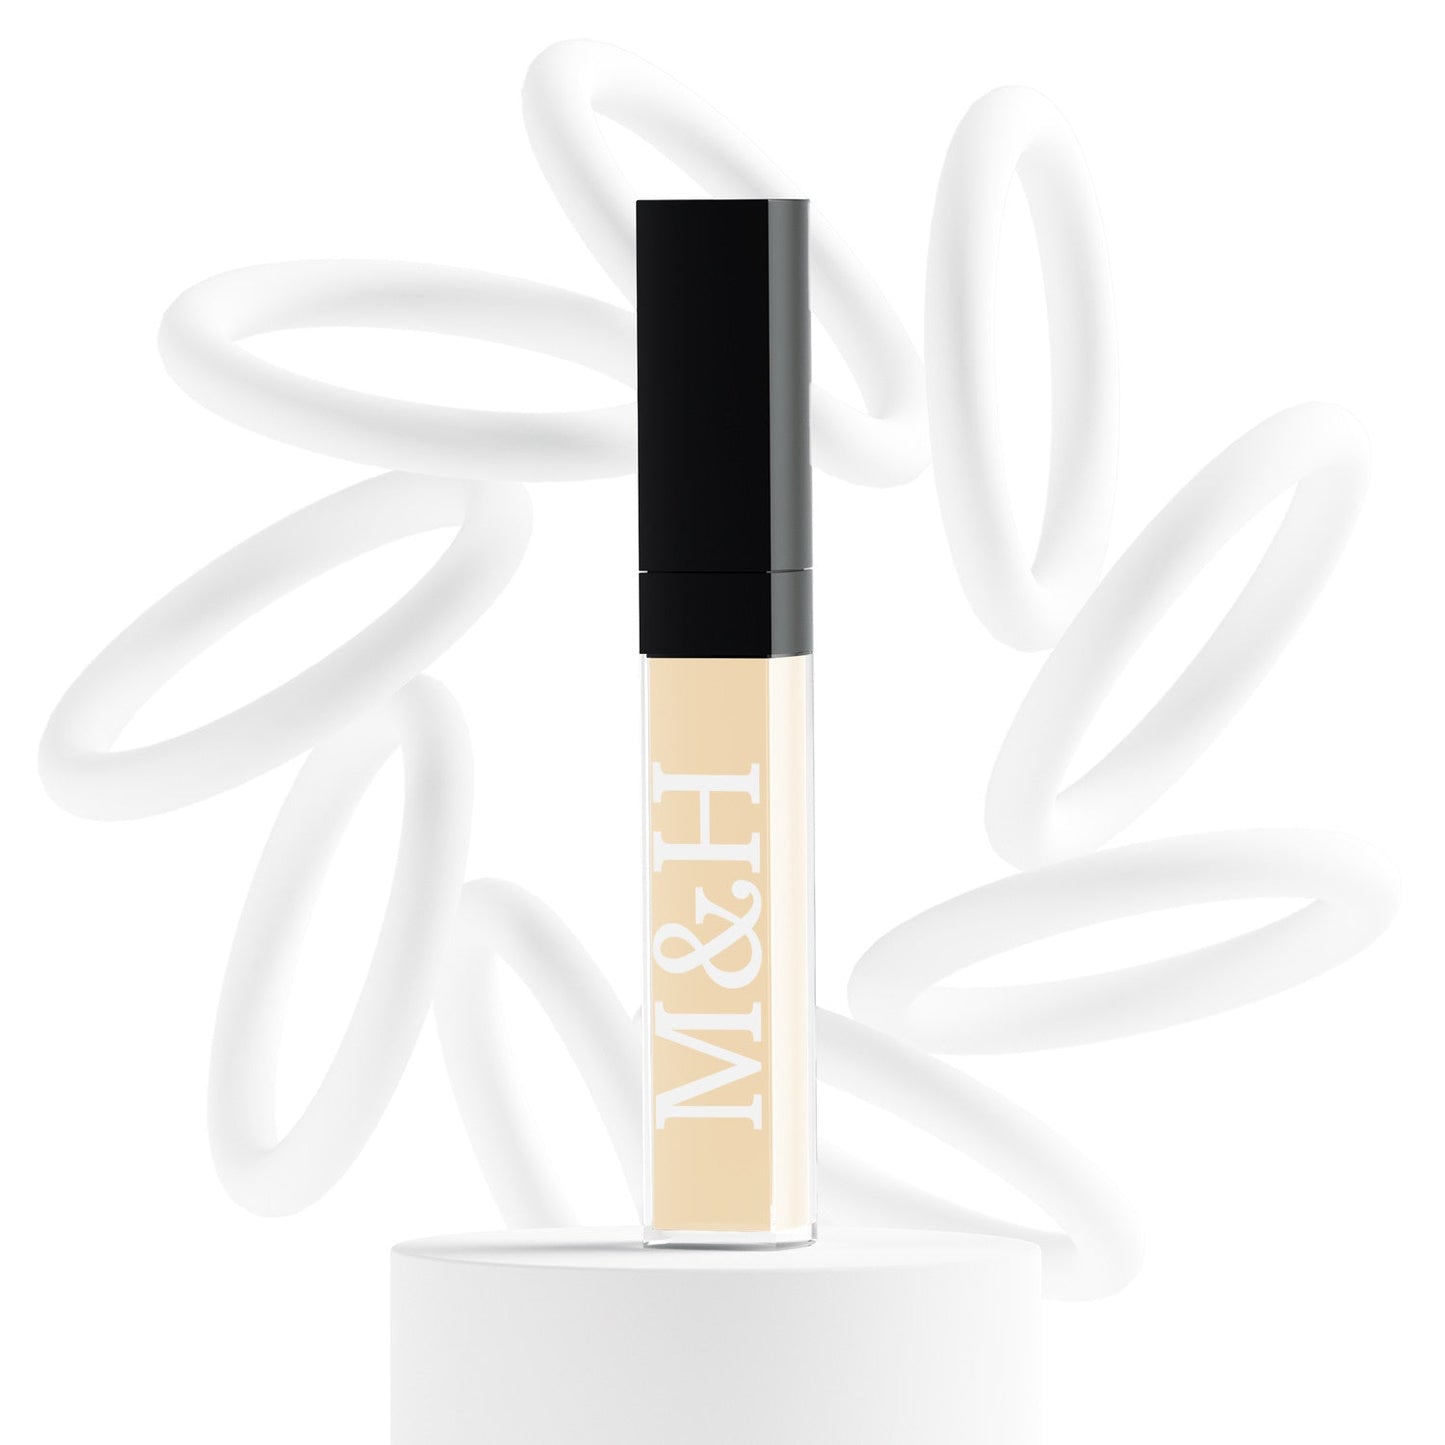 Vegan Concealers - M&H FashionVegan ConcealersconcealerM&H FashionM&H FashionConcealer-911Medium Light PorcelainVegan ConcealersM&H FashionconcealerM&H Fashion This multifunctional concealer is designed to cover under-eye circles, complexion alterations, and major imperfections like scars, hyperpigmentation, burns, and tatVegan Concealers